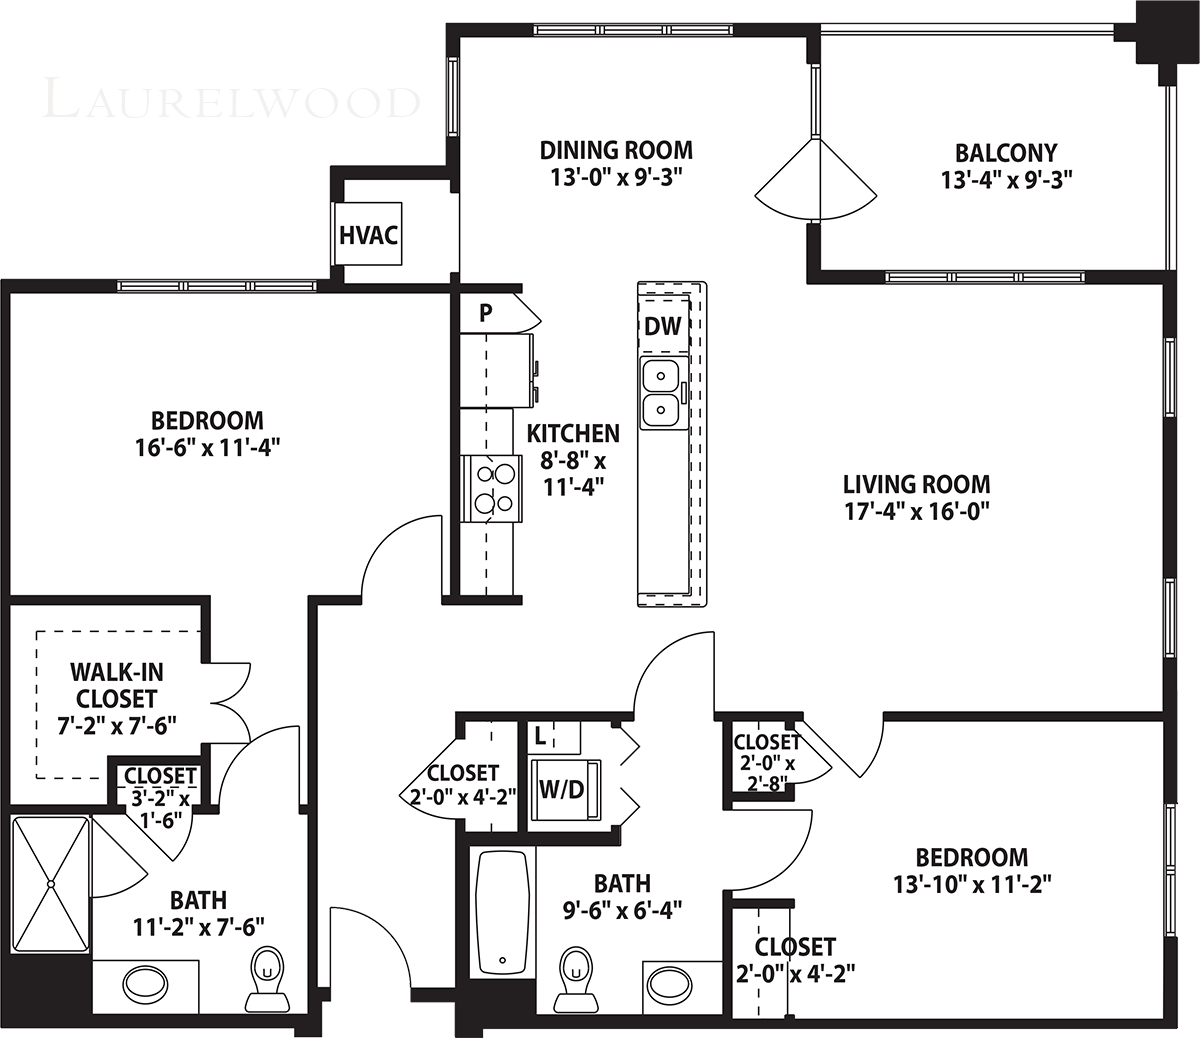 Interactive map of the Laurelwood floor plan that includes pop-up images of the interior